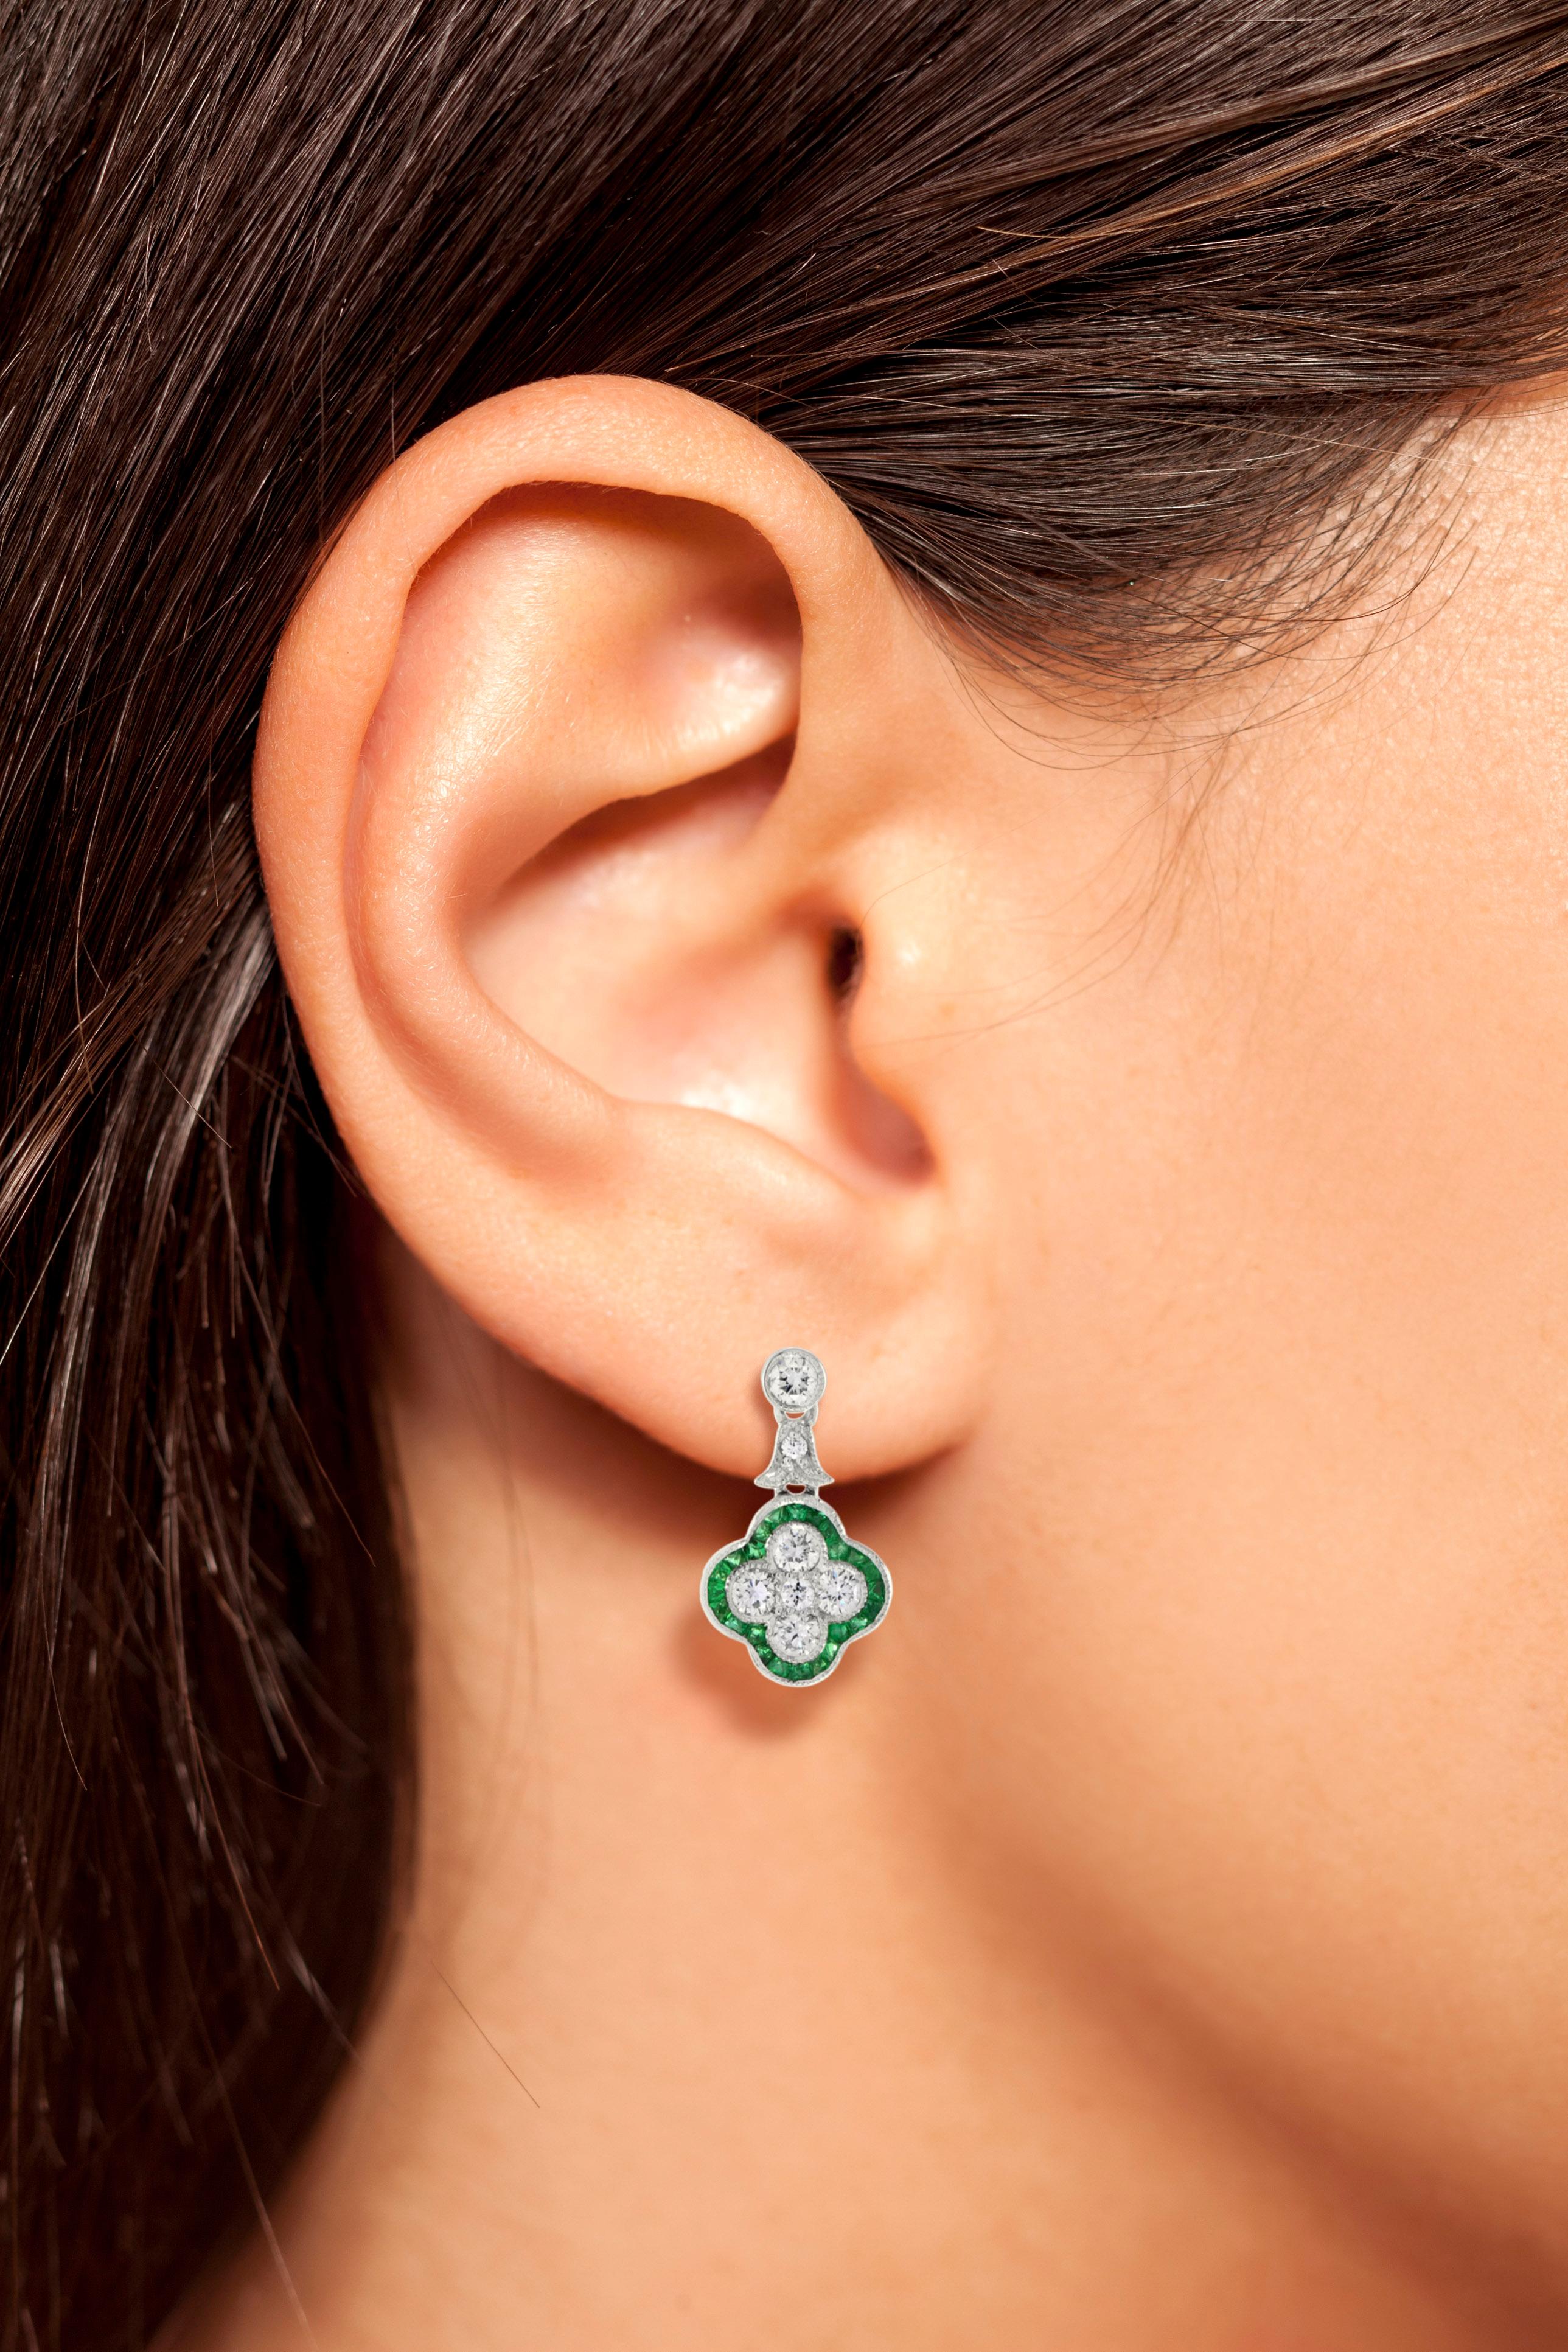 A lovely pair of earrings for anyone who loves antique-inspired jewelry. Made of dazzling round cut diamond and French cut emerald set on 18k white gold. Total fourteen diamonds form a flower with an emerald trim design for a beautifully feminine